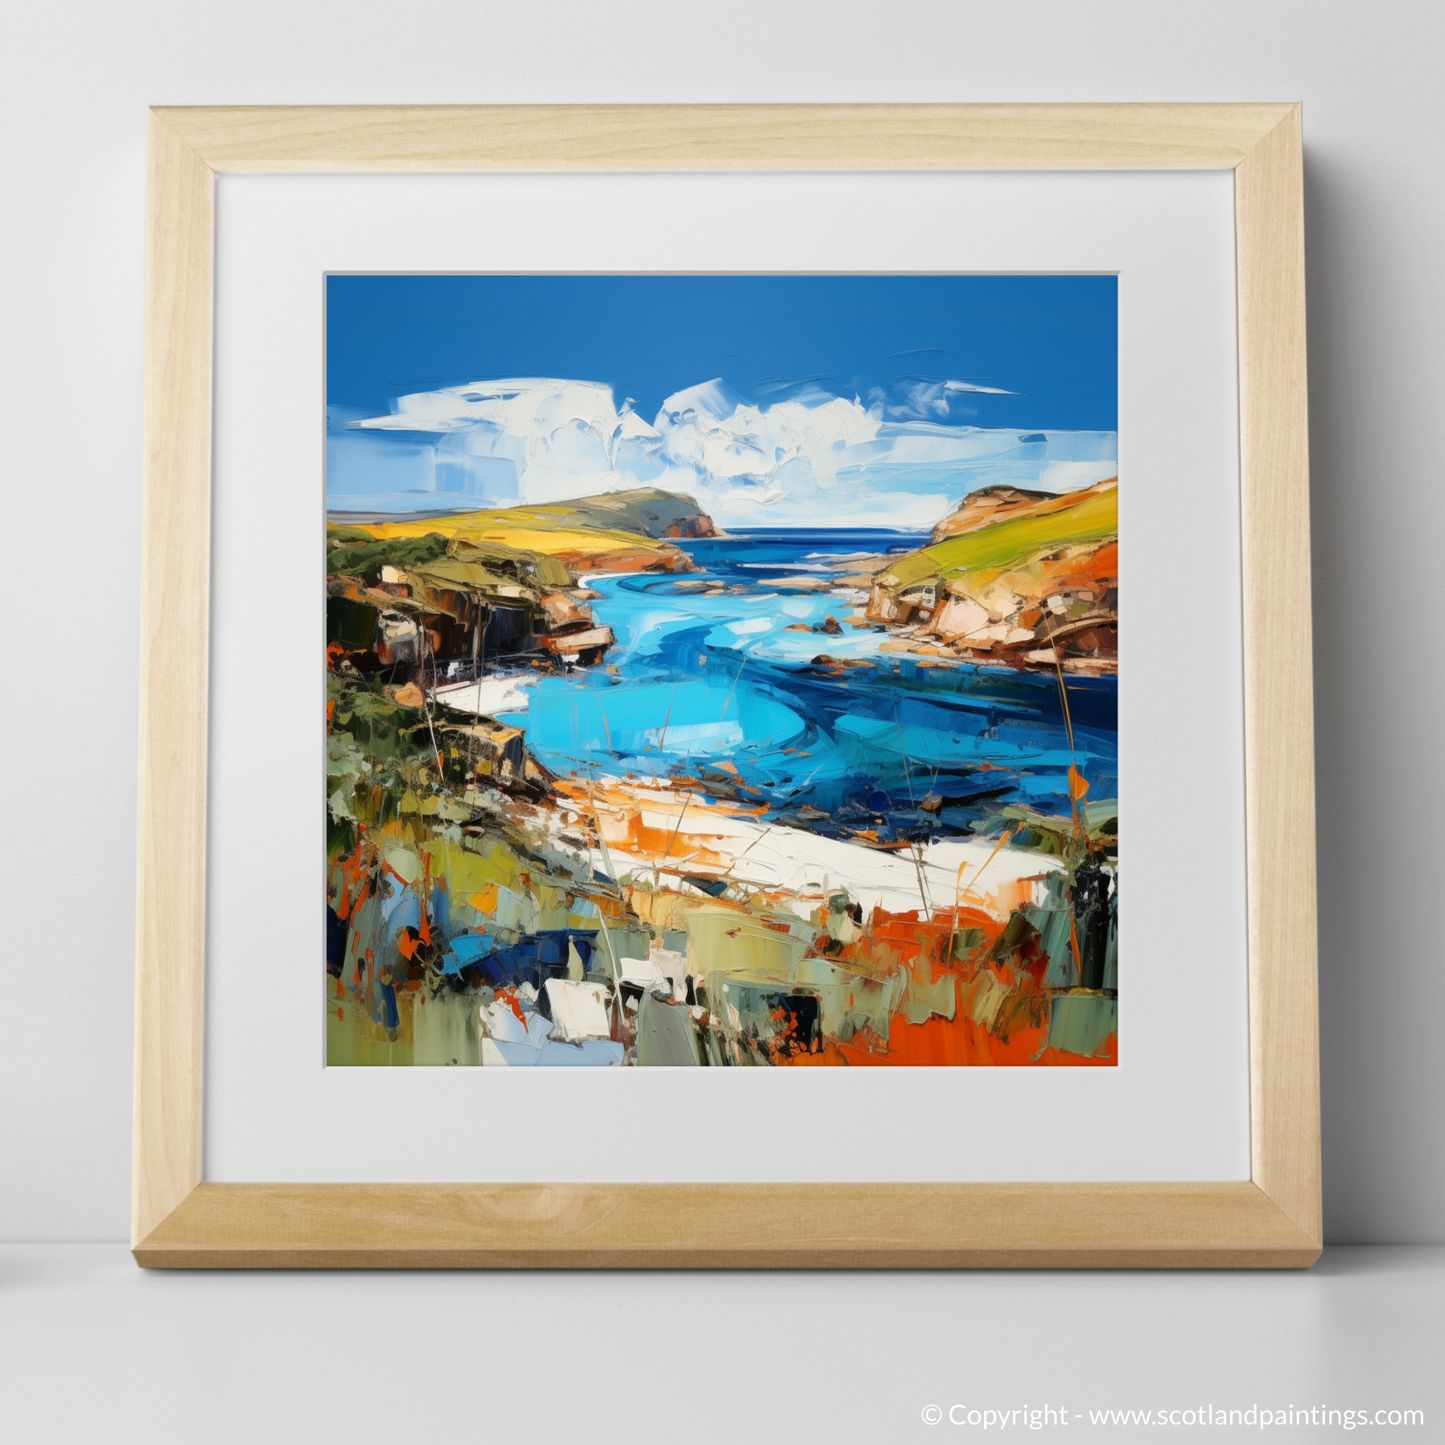 Art Print of Scourie Bay, Sutherland with a natural frame